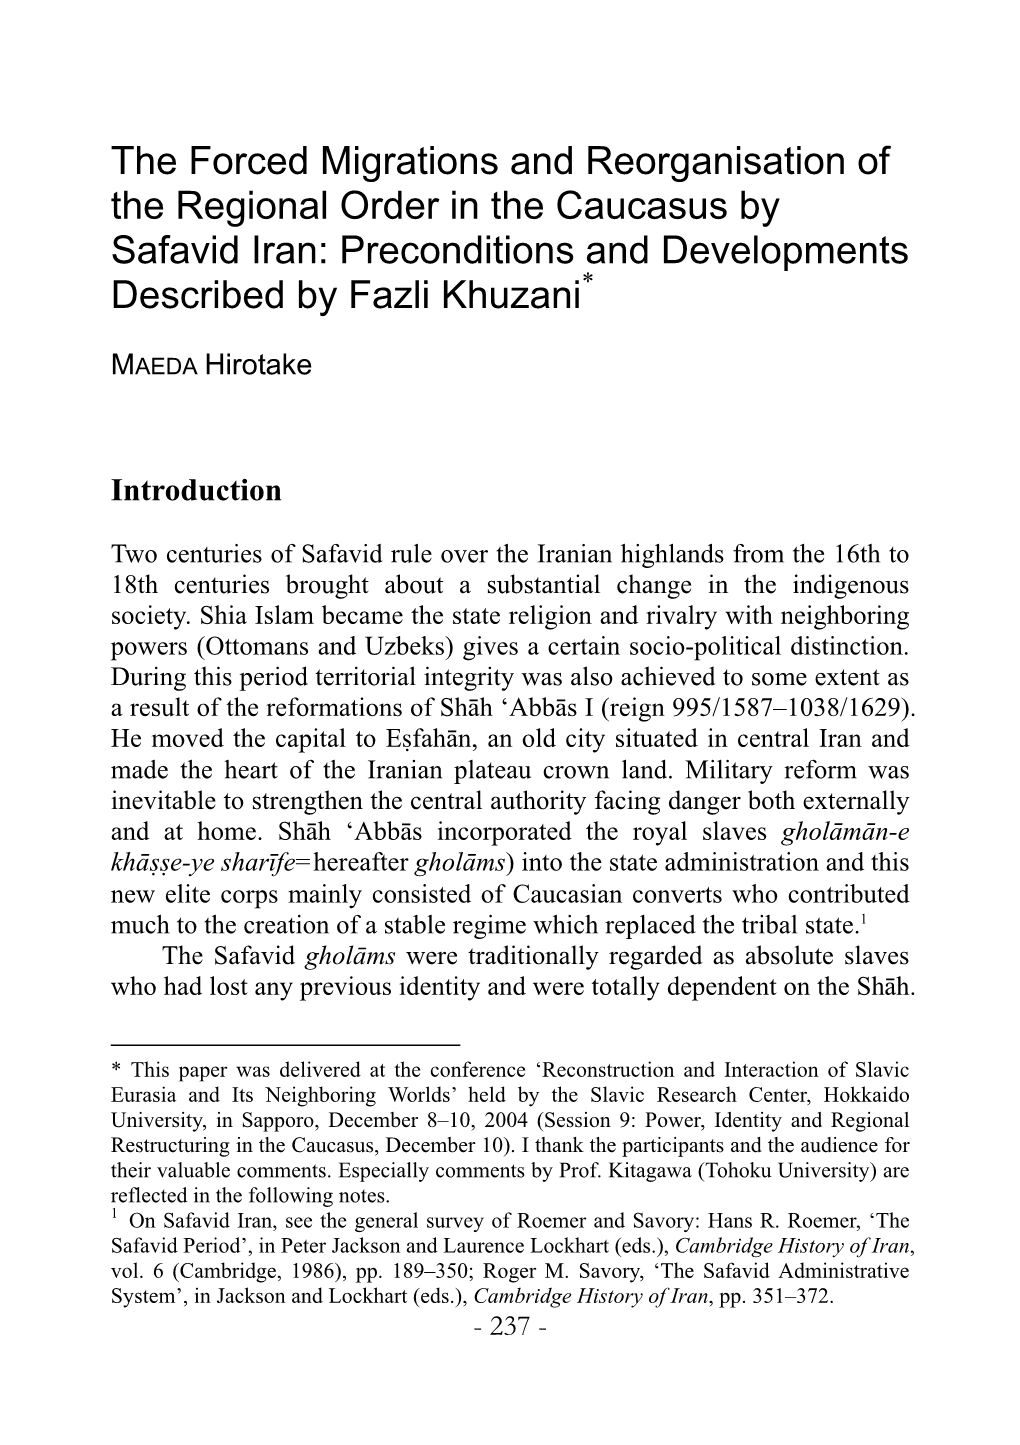 The Forced Migrations and Reorganisation of the Regional Order in the Caucasus by Safavid Iran: Preconditions and Developments Described by Fazli Khuzani*